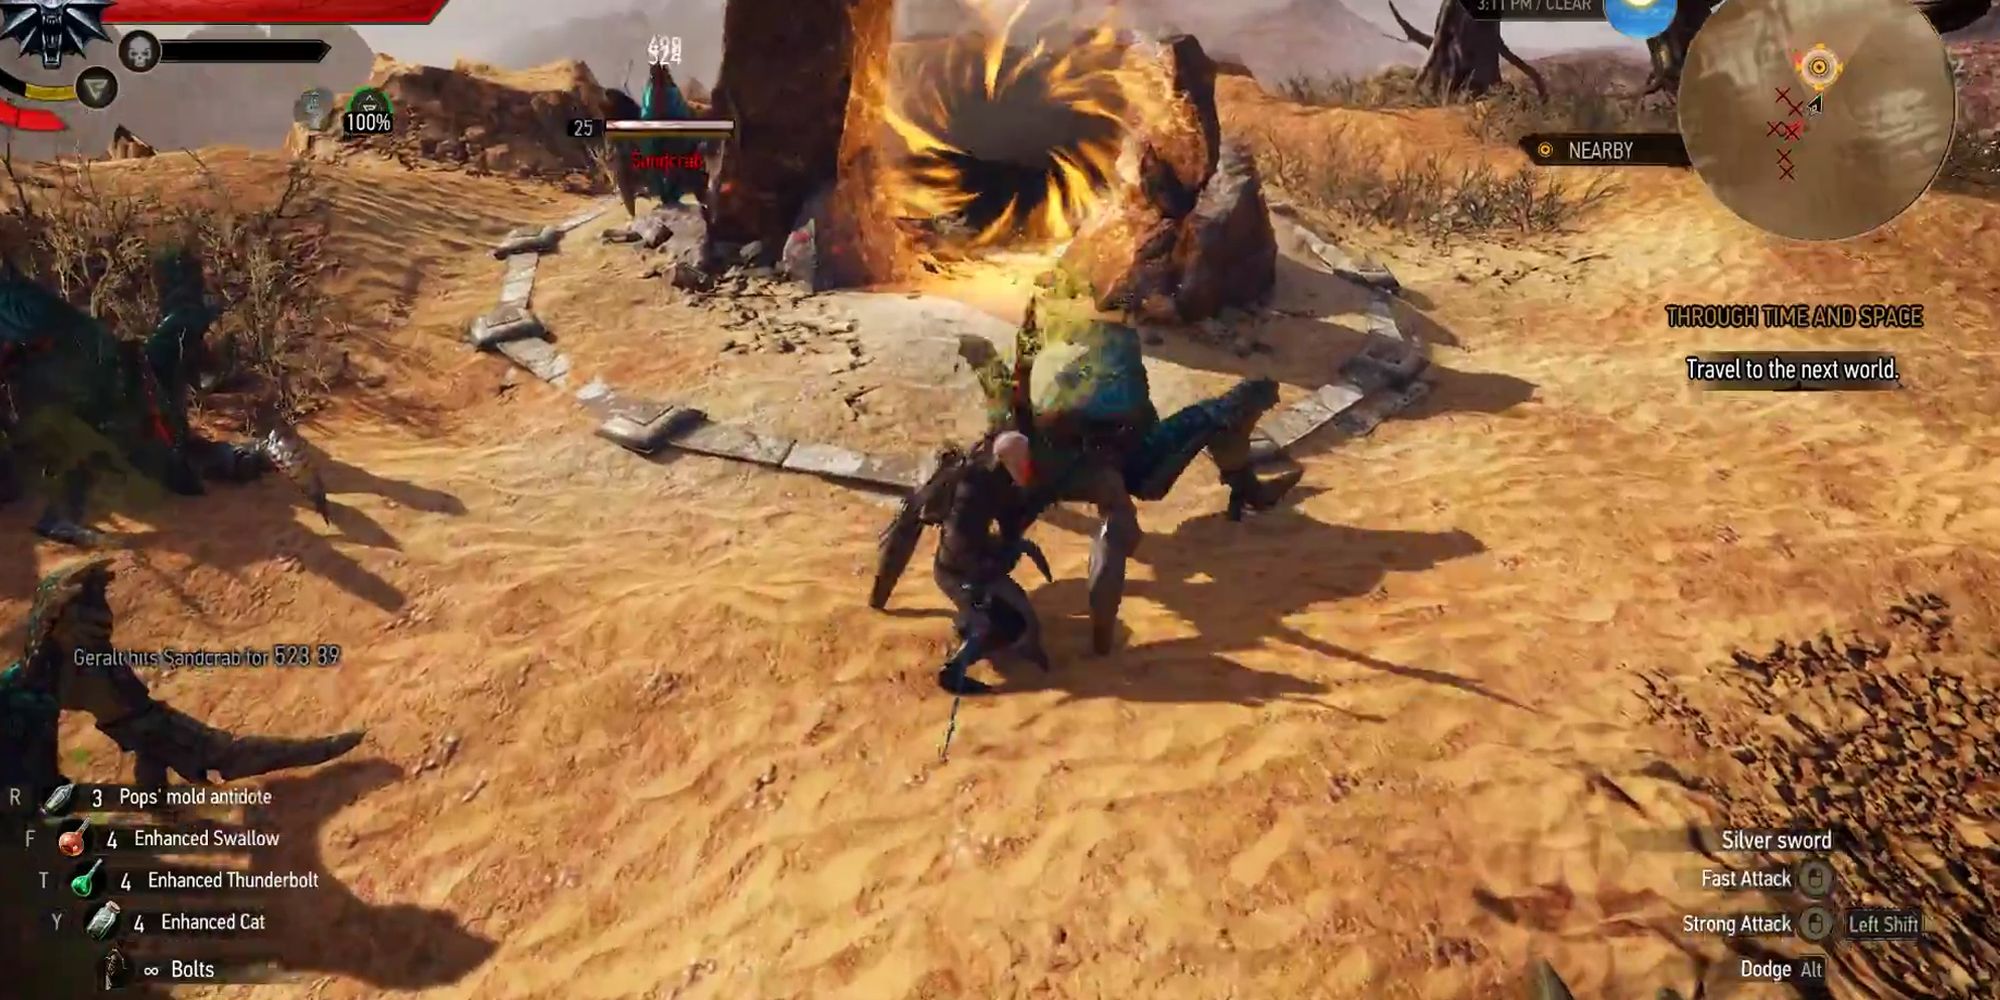 The Witcher 3 Geralt fighting Sand crabs with a portal next to him.